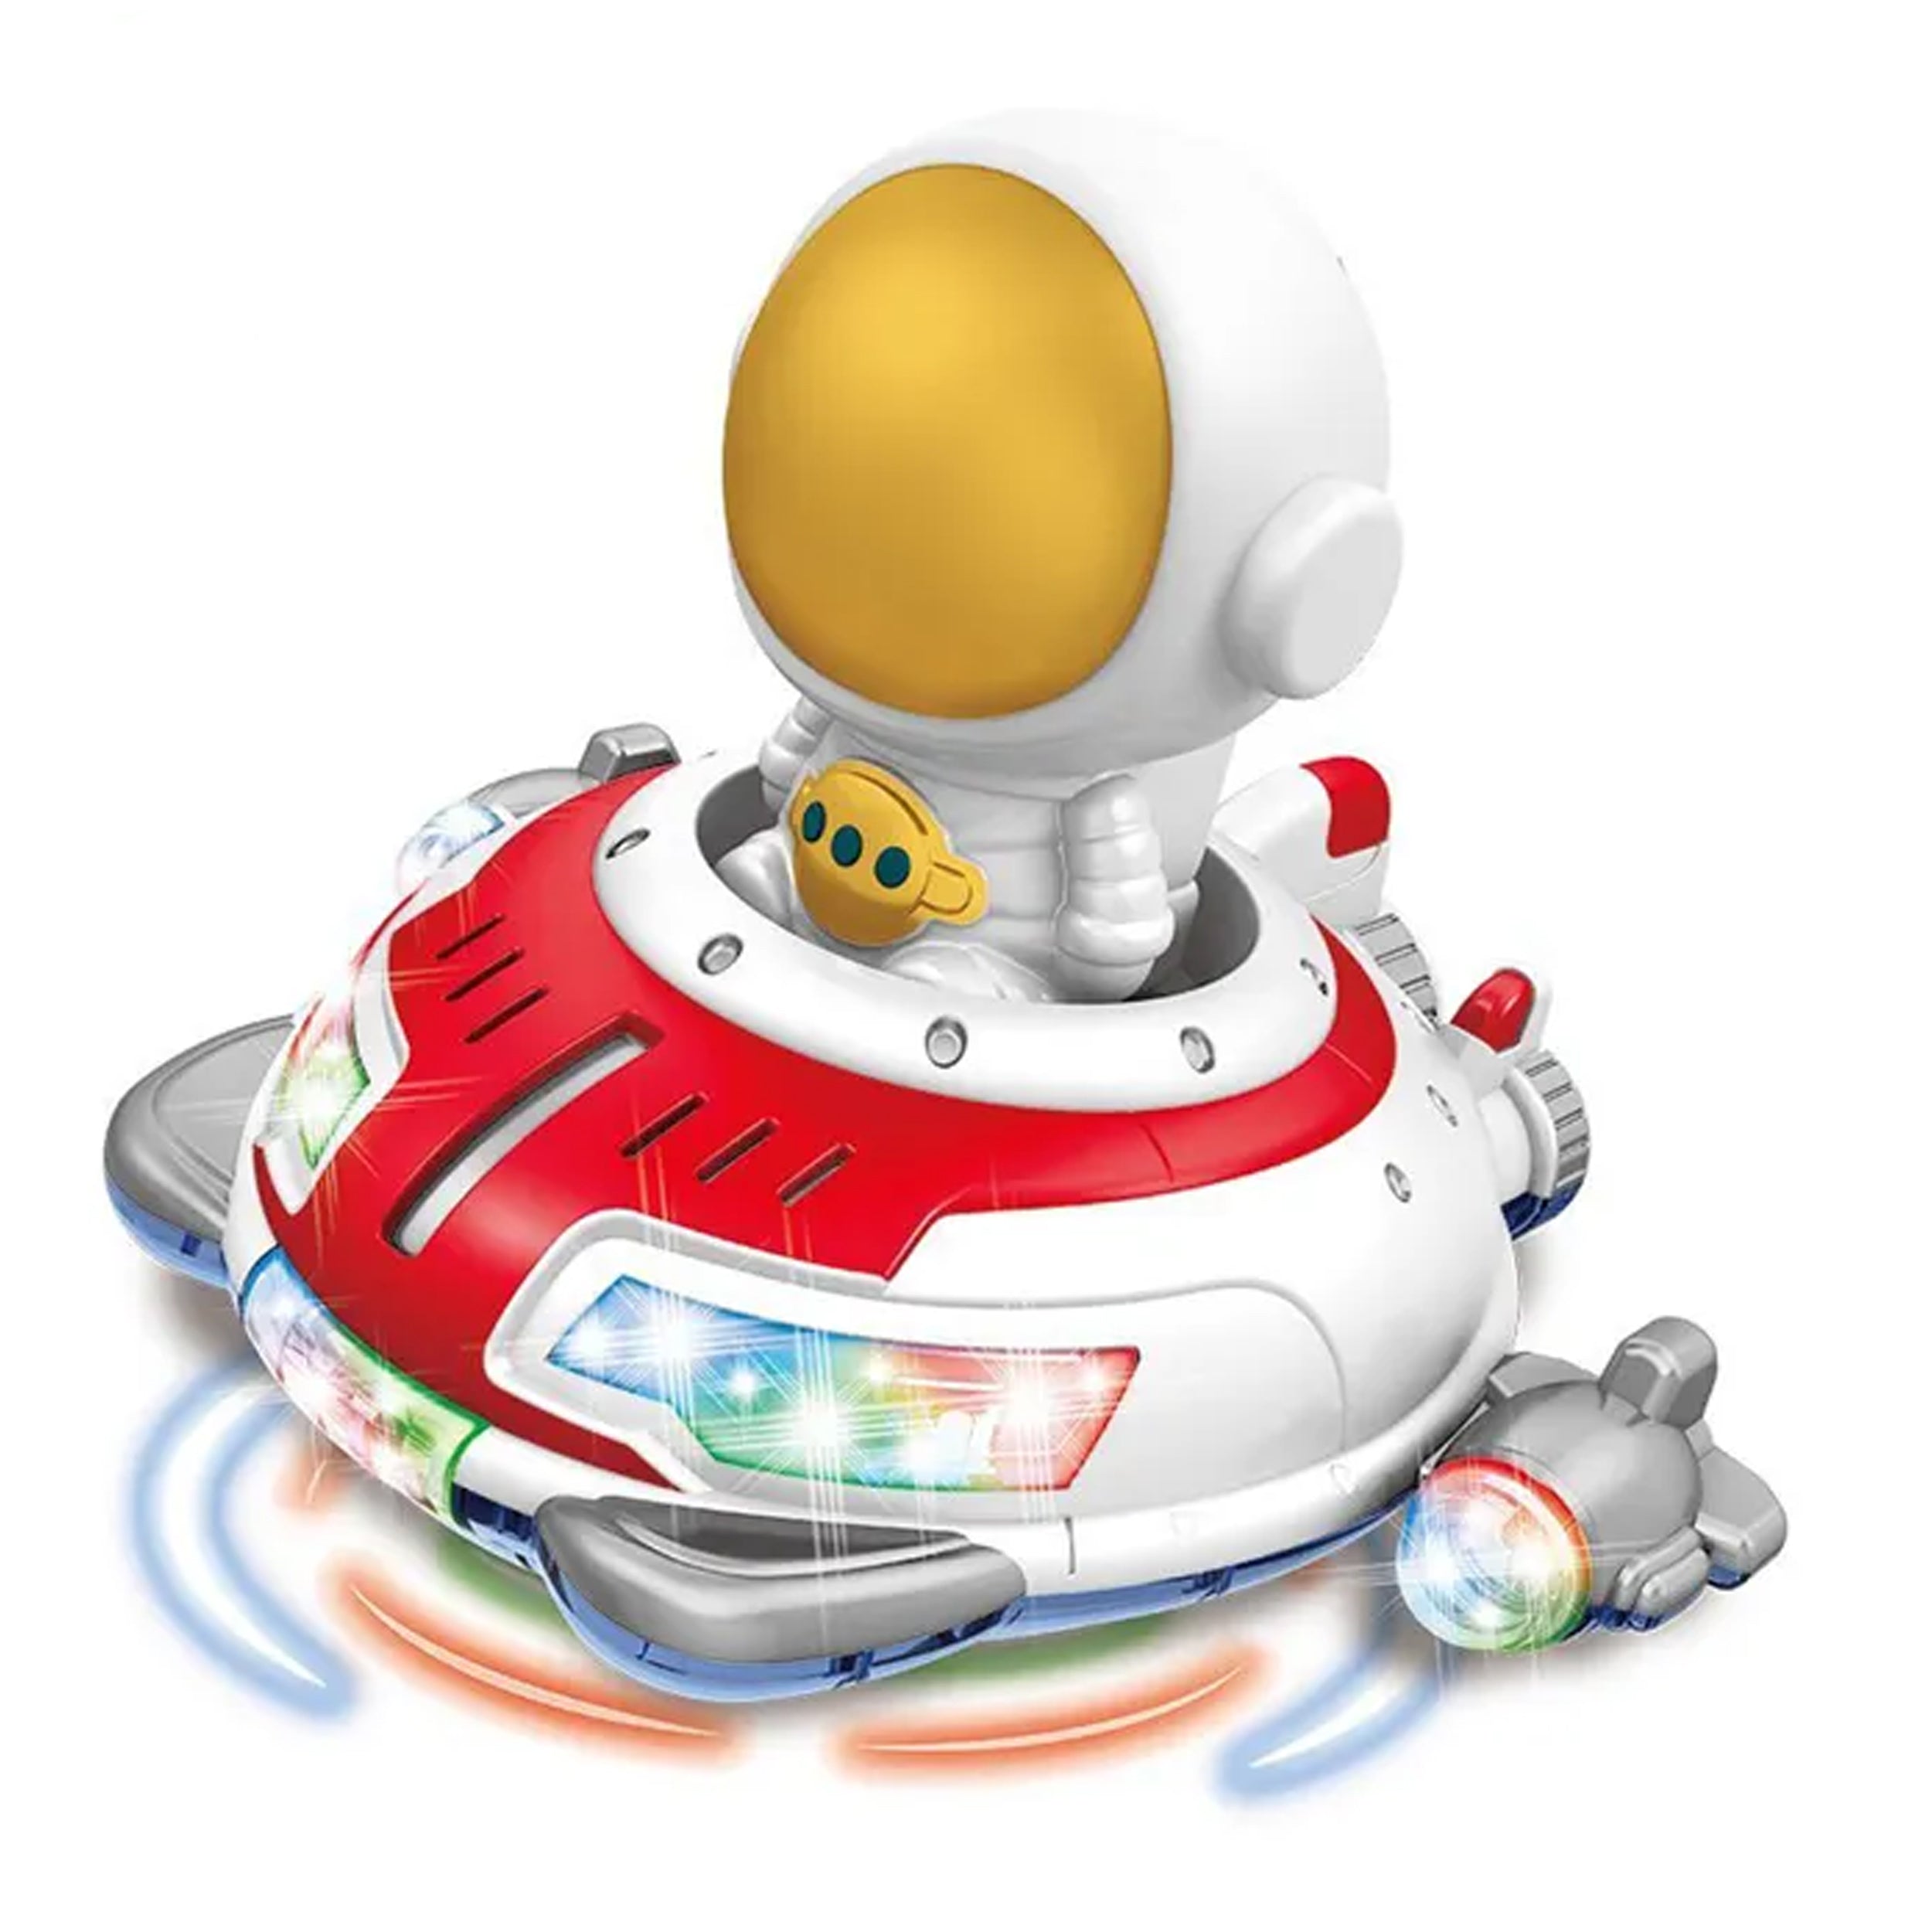 Blast Off Into Fun with Our Electric Universal Spaceship with Music Lights